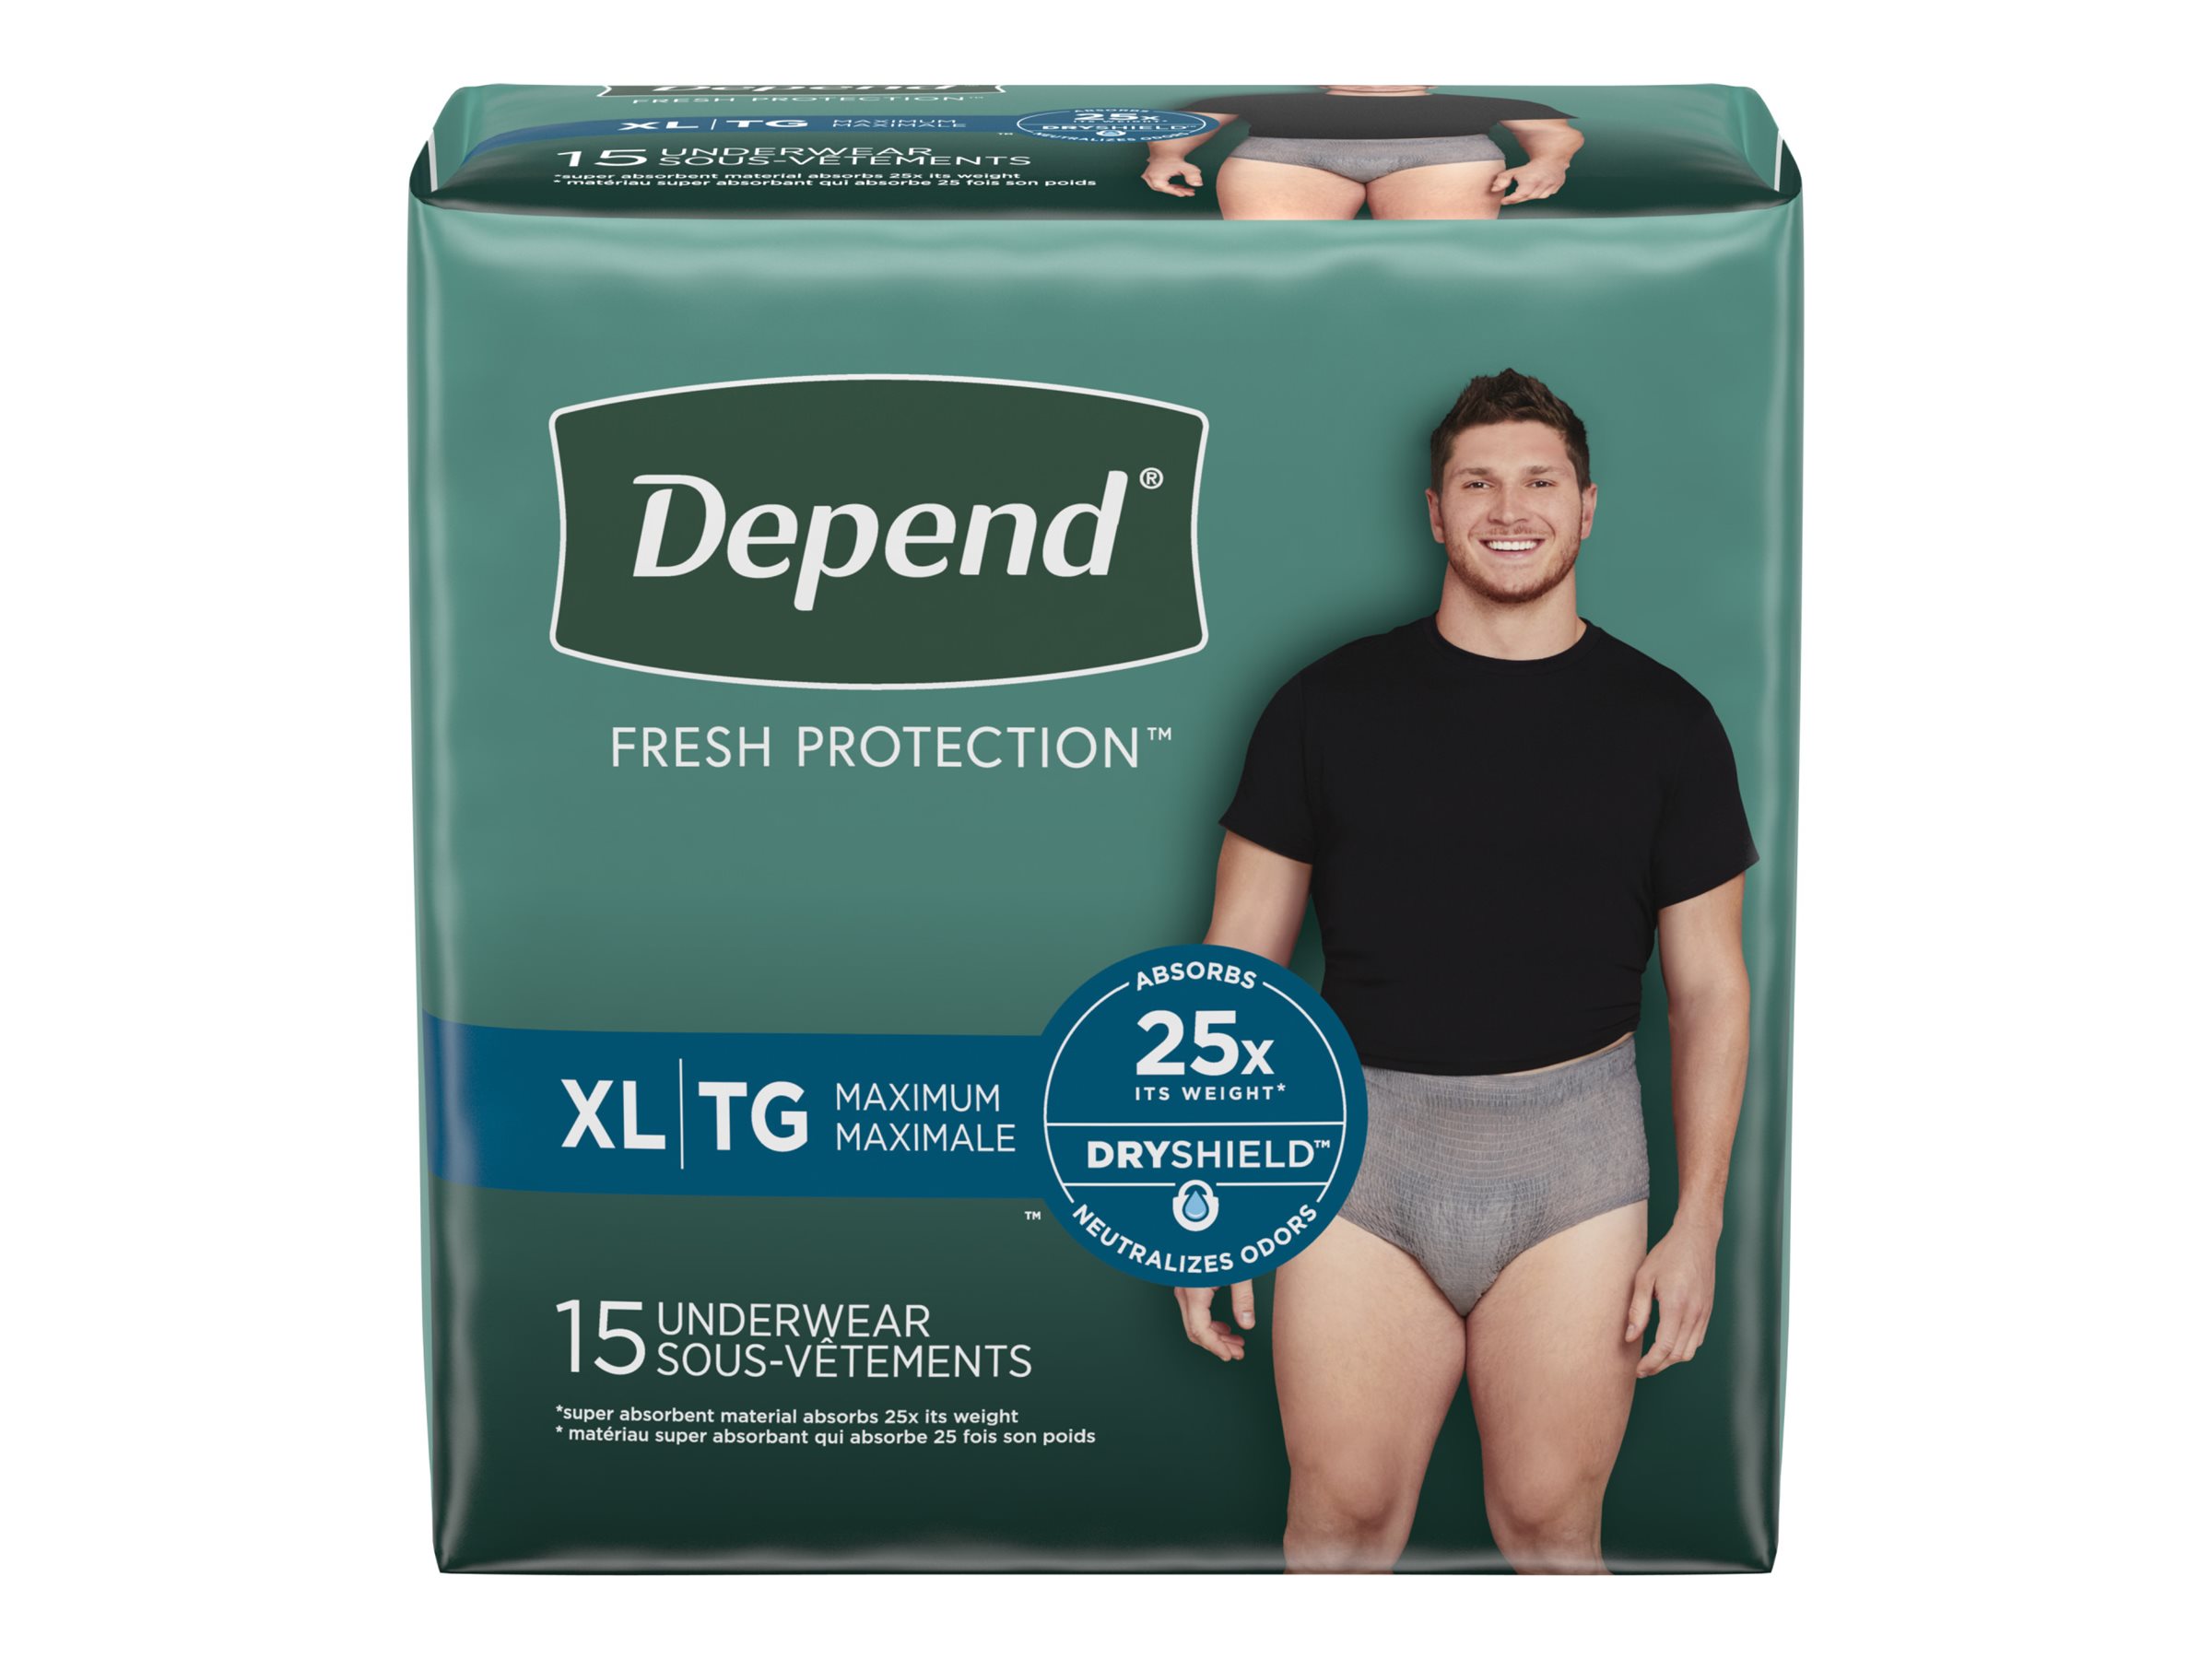 Depend Fresh Protection Adult Incontinence Underwear For Women